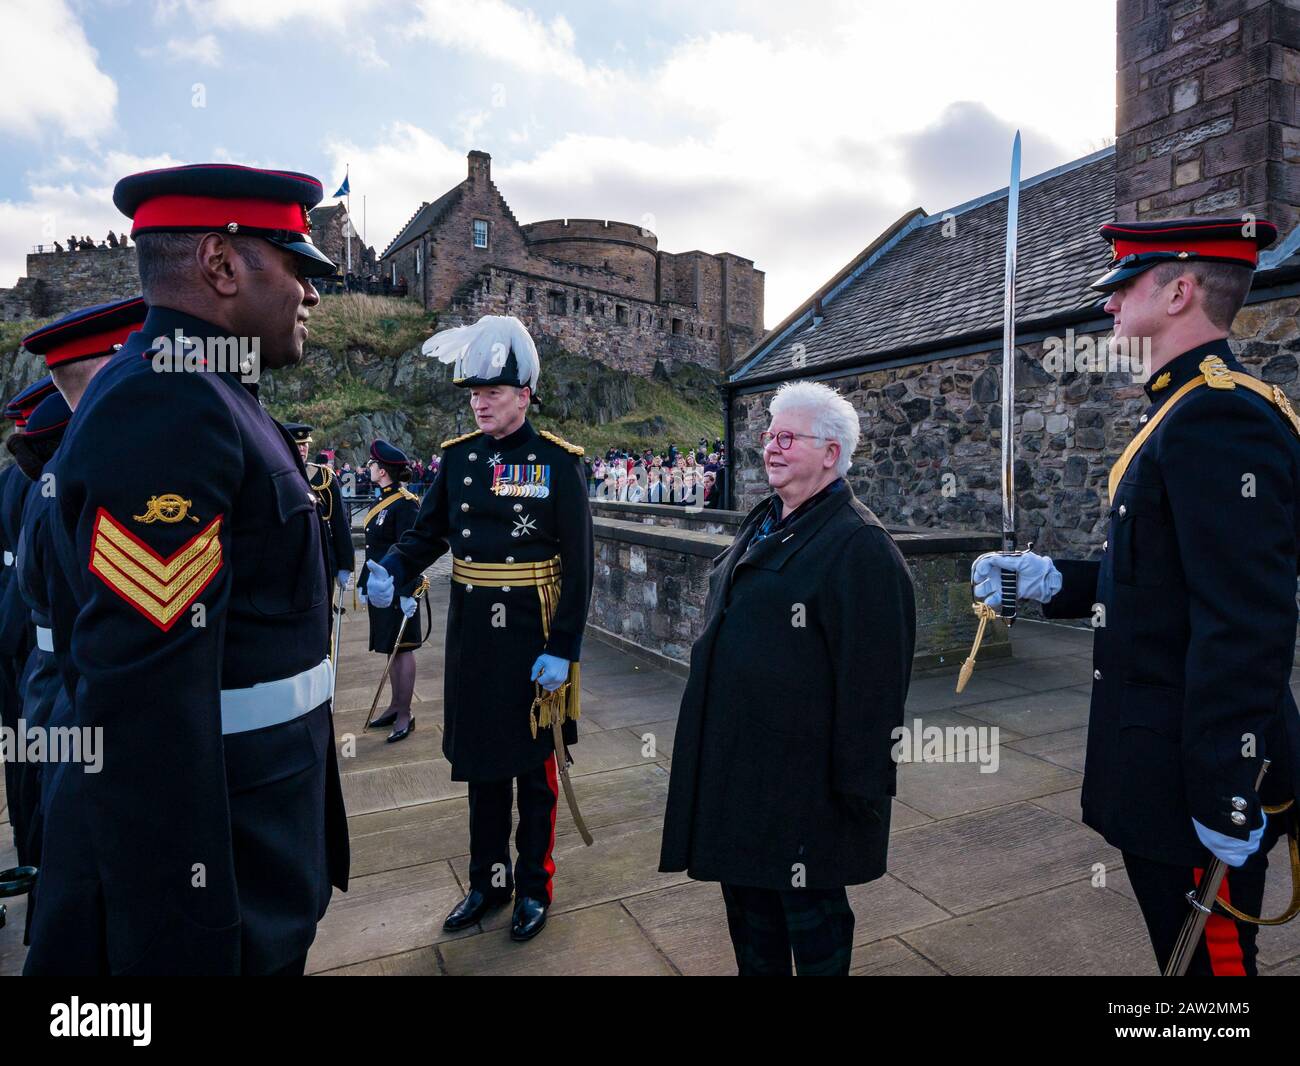 Edinburgh Castle, Edinburgh, Scotland, United Kingdom, 06 February 2020. 21 Gun Salute: The salute by the 26 Regiment Royal Artillery marks the occasion of the Queen’s accession to the throne on 6th February 1952. Val McDermid, Scottish crime writer inspects the regiment marking 20 years since the LGBT ban in the British Army was lifted with General Alastair Bruce Stock Photo